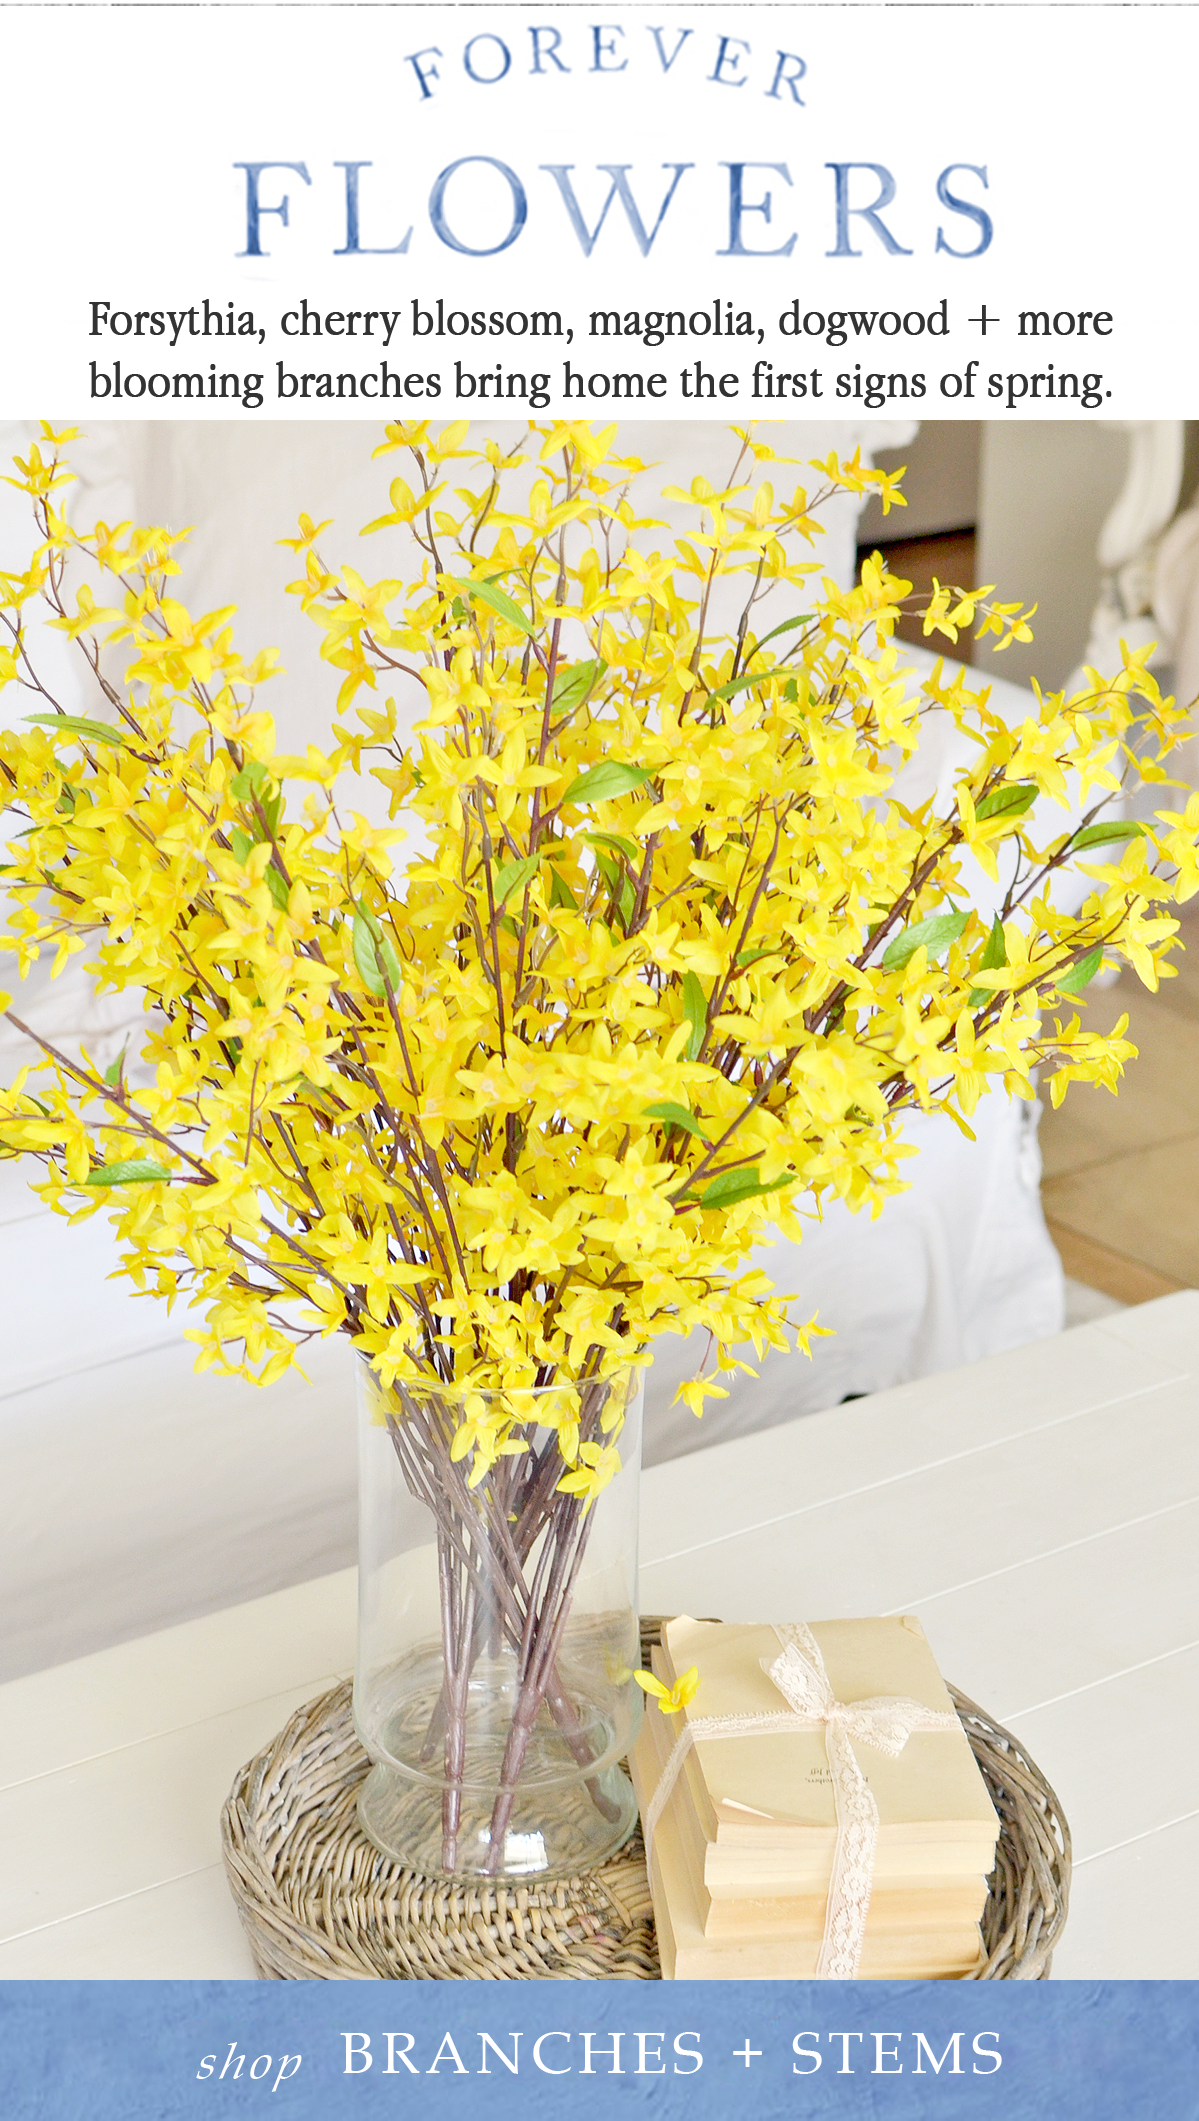 Forever Flowers Forsythia, cherry blossom, magnolia, dogwood + more blooming branches bring home the first signs of spring. Shop Branches + Stems